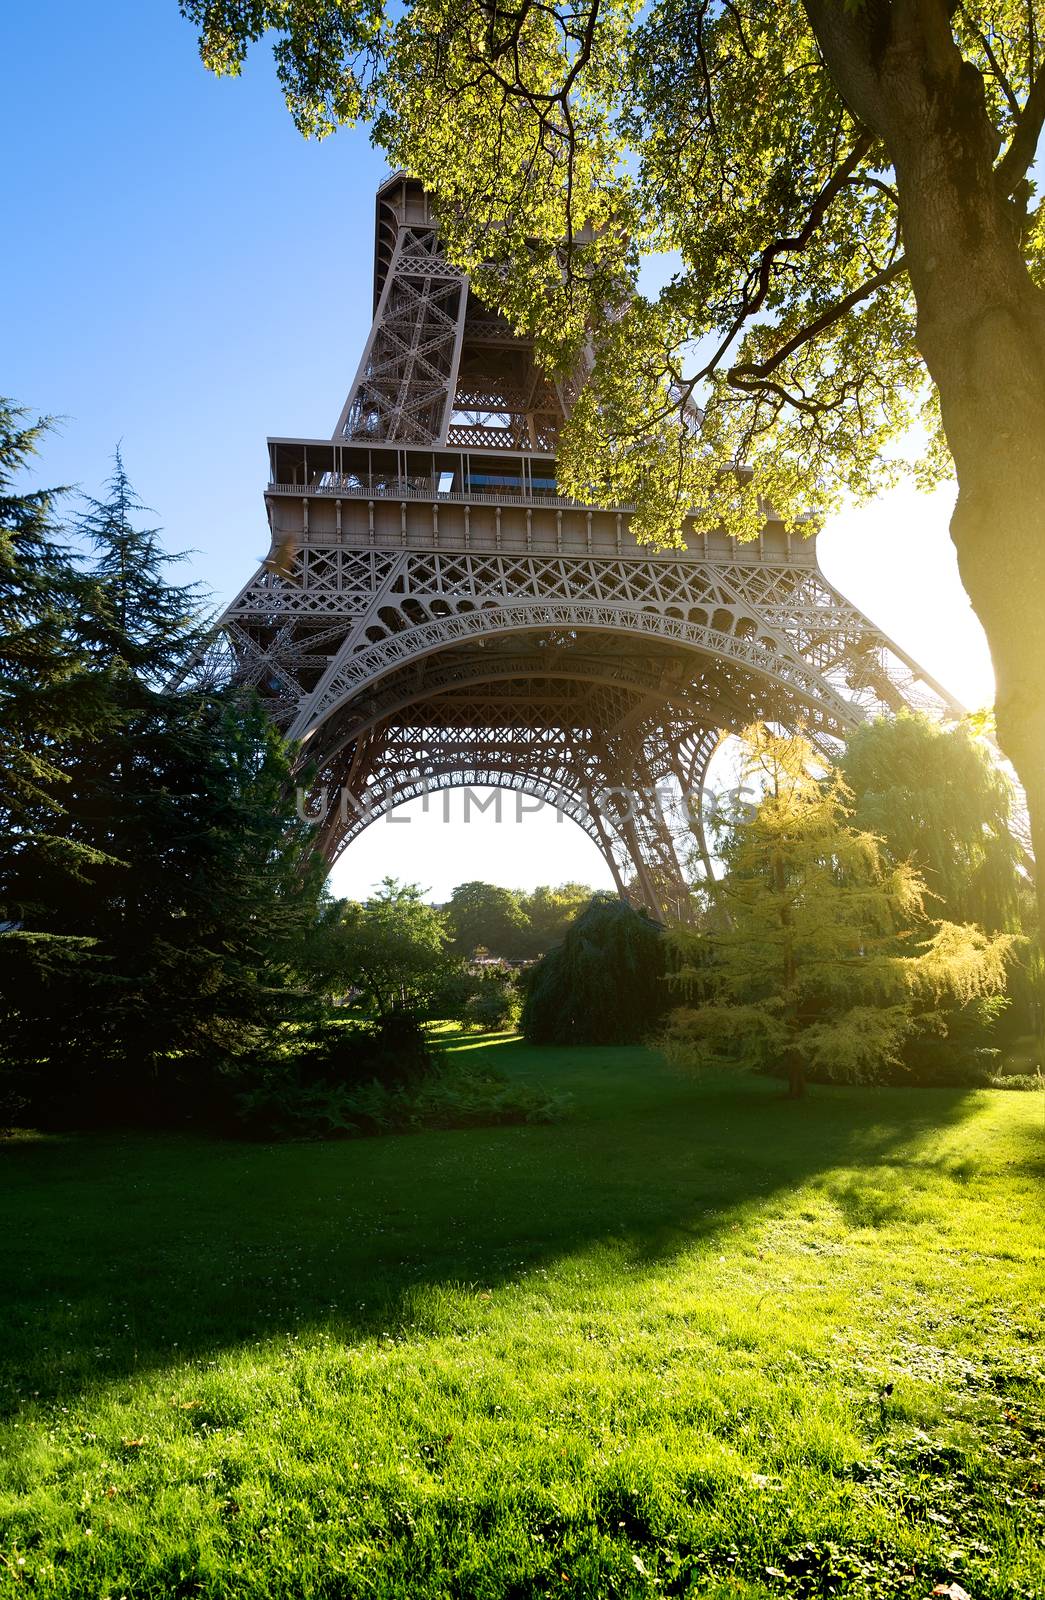 Great Eiffel tower in Paris and landscape